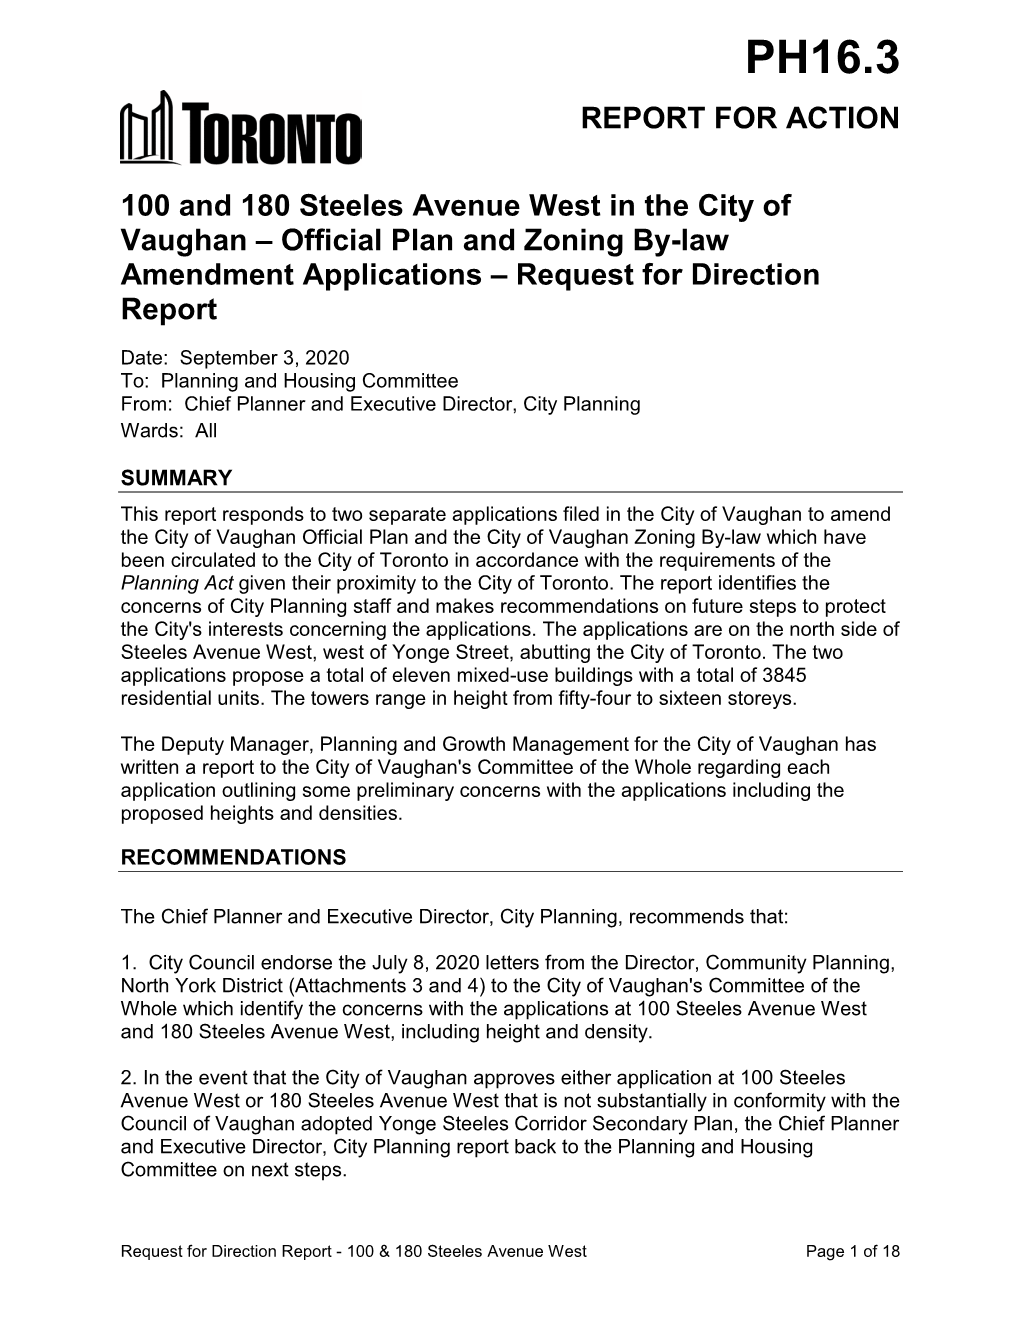 100 and 180 Steeles Avenue West in the City of Vaughan – Official Plan and Zoning By-Law Amendment Applications – Request for Direction Report